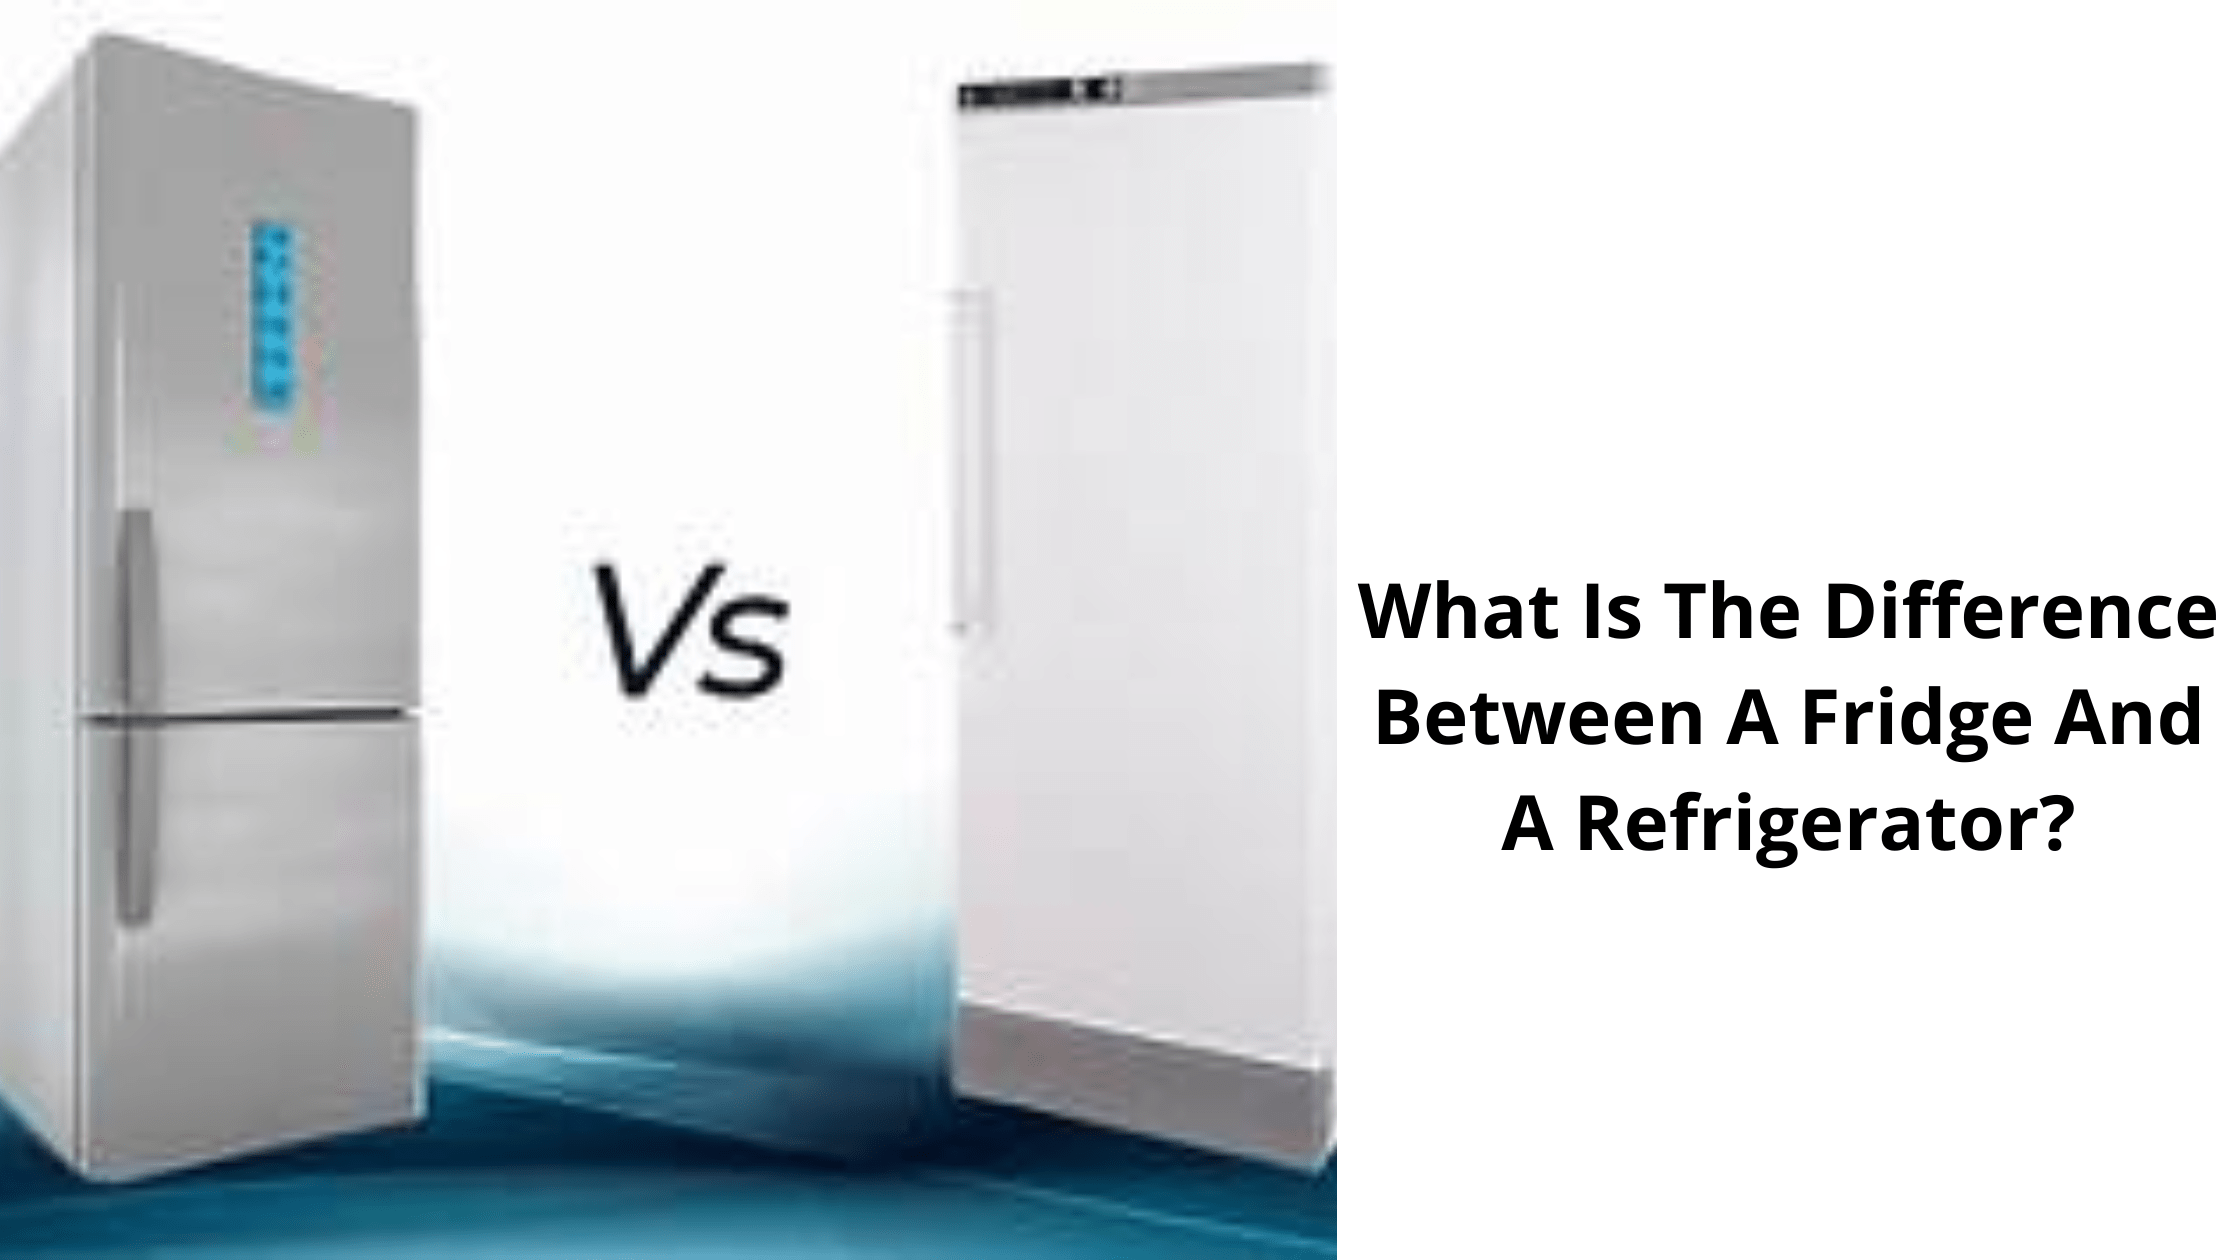 What Is The Difference Between A Fridge And A Refrigerator?